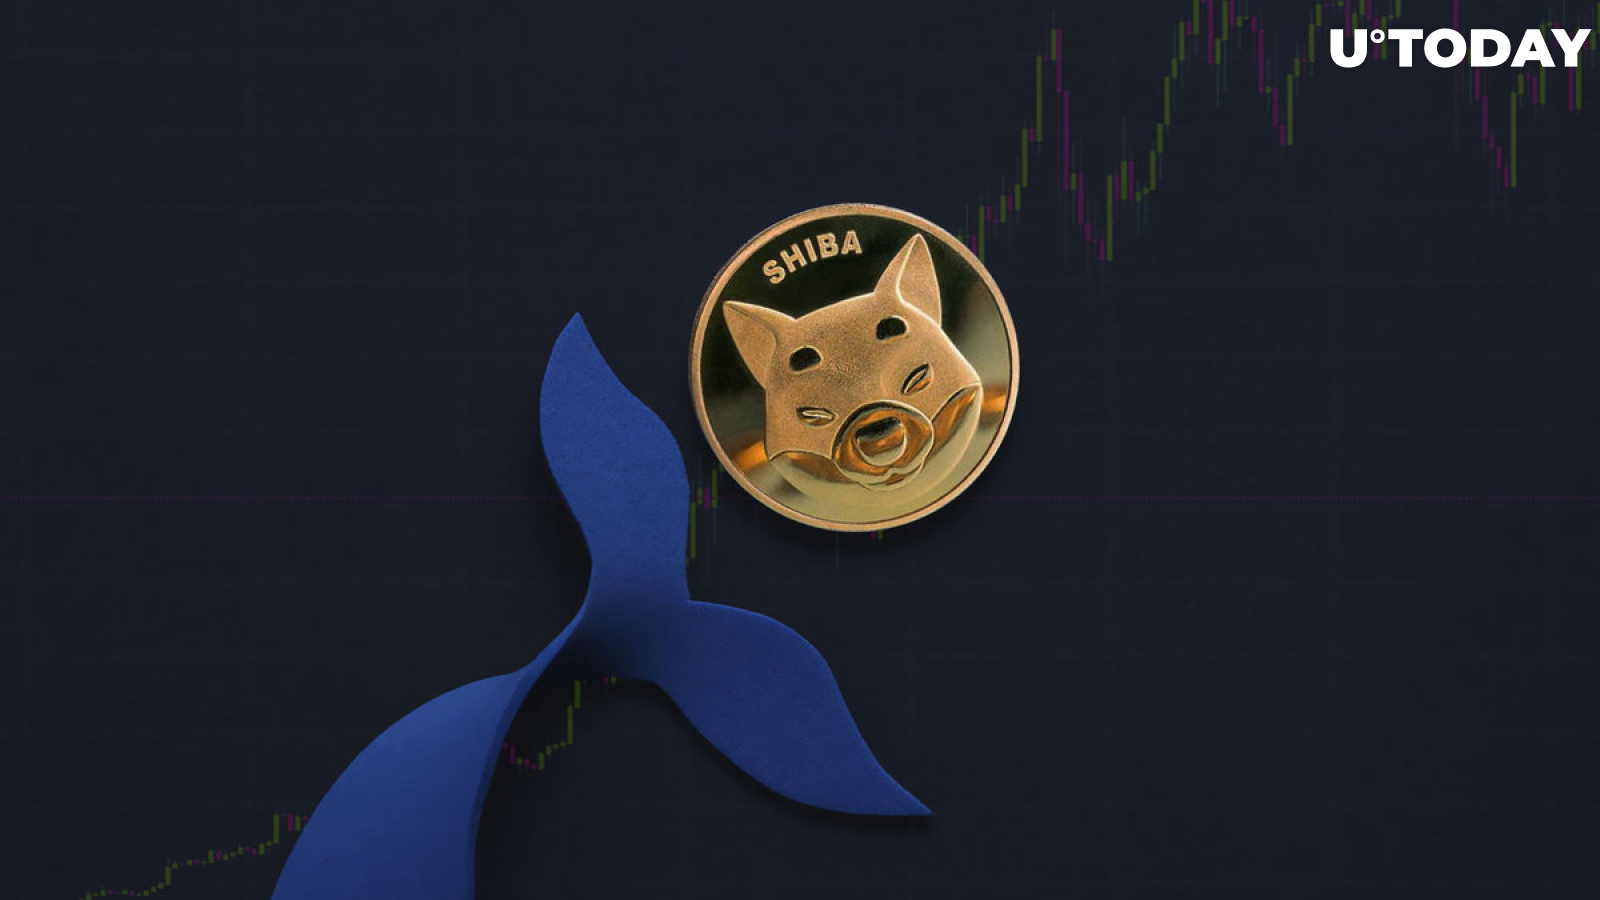 Here's Why Top Whales Sold 1.4 Trillion SHIB, According to Fresh Trading Data